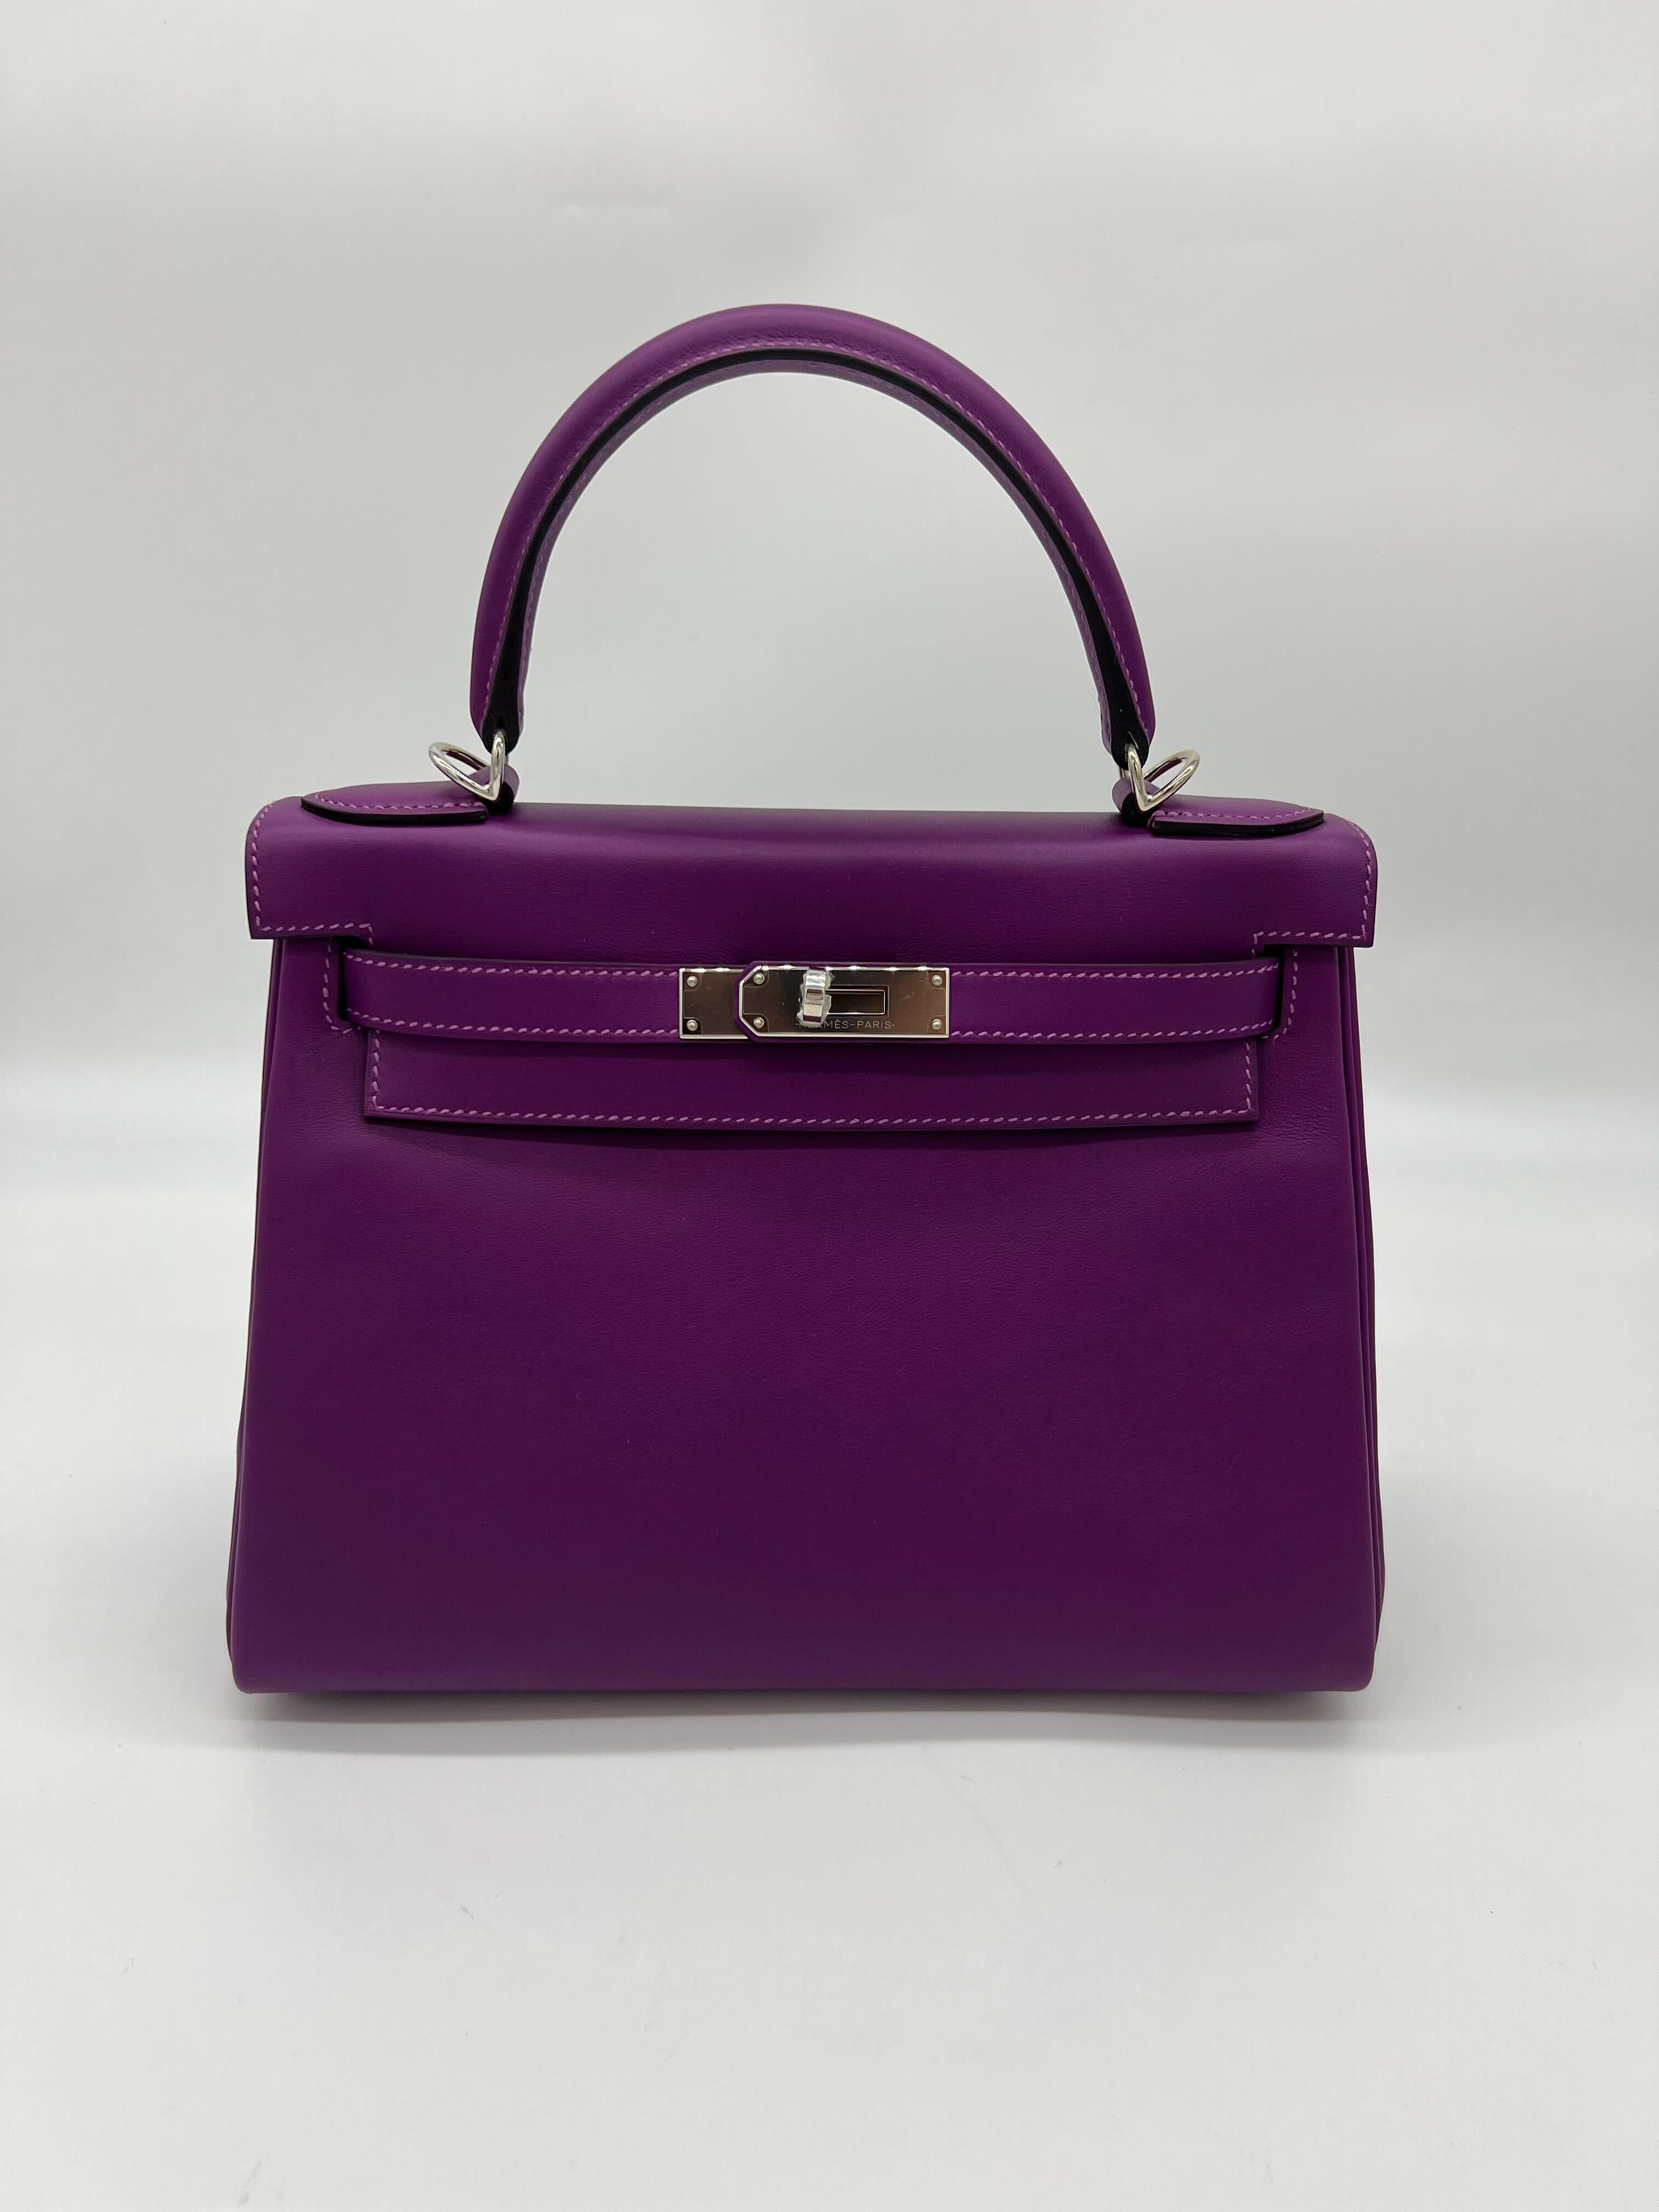 Hermes Kelly II Retourne 28 Veau Swift Anemone, Palladium Hardware

Condition: Brand New 
Material: Swift Leather
Measurements: (W)28cm × (H)22cm × (D)11.5cm
Hardware: Palladium plated
 
*Comes in full original packaging. 
*Includes original Hermes